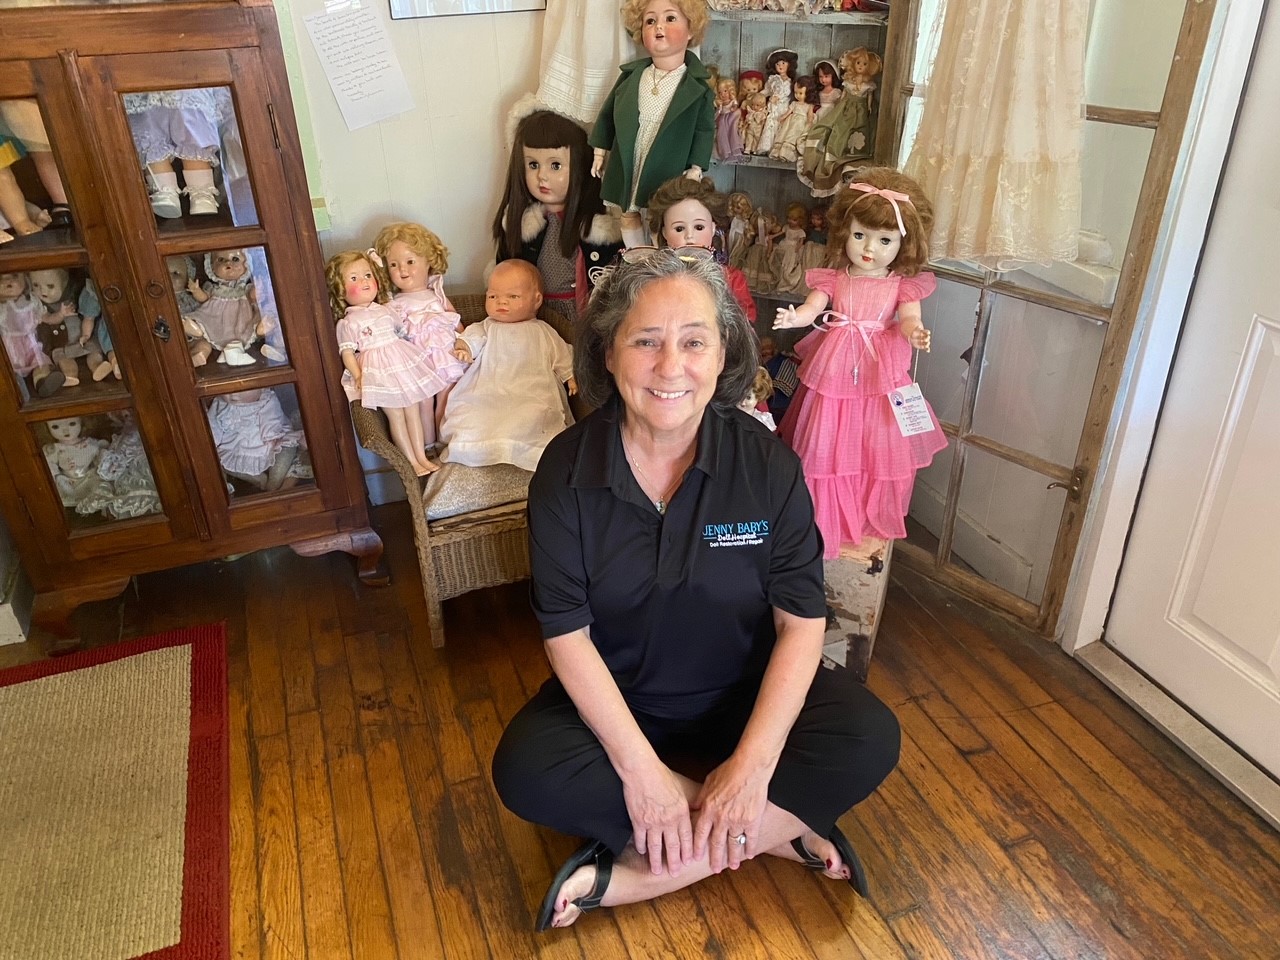 Doll hospital sees spike during pandemic